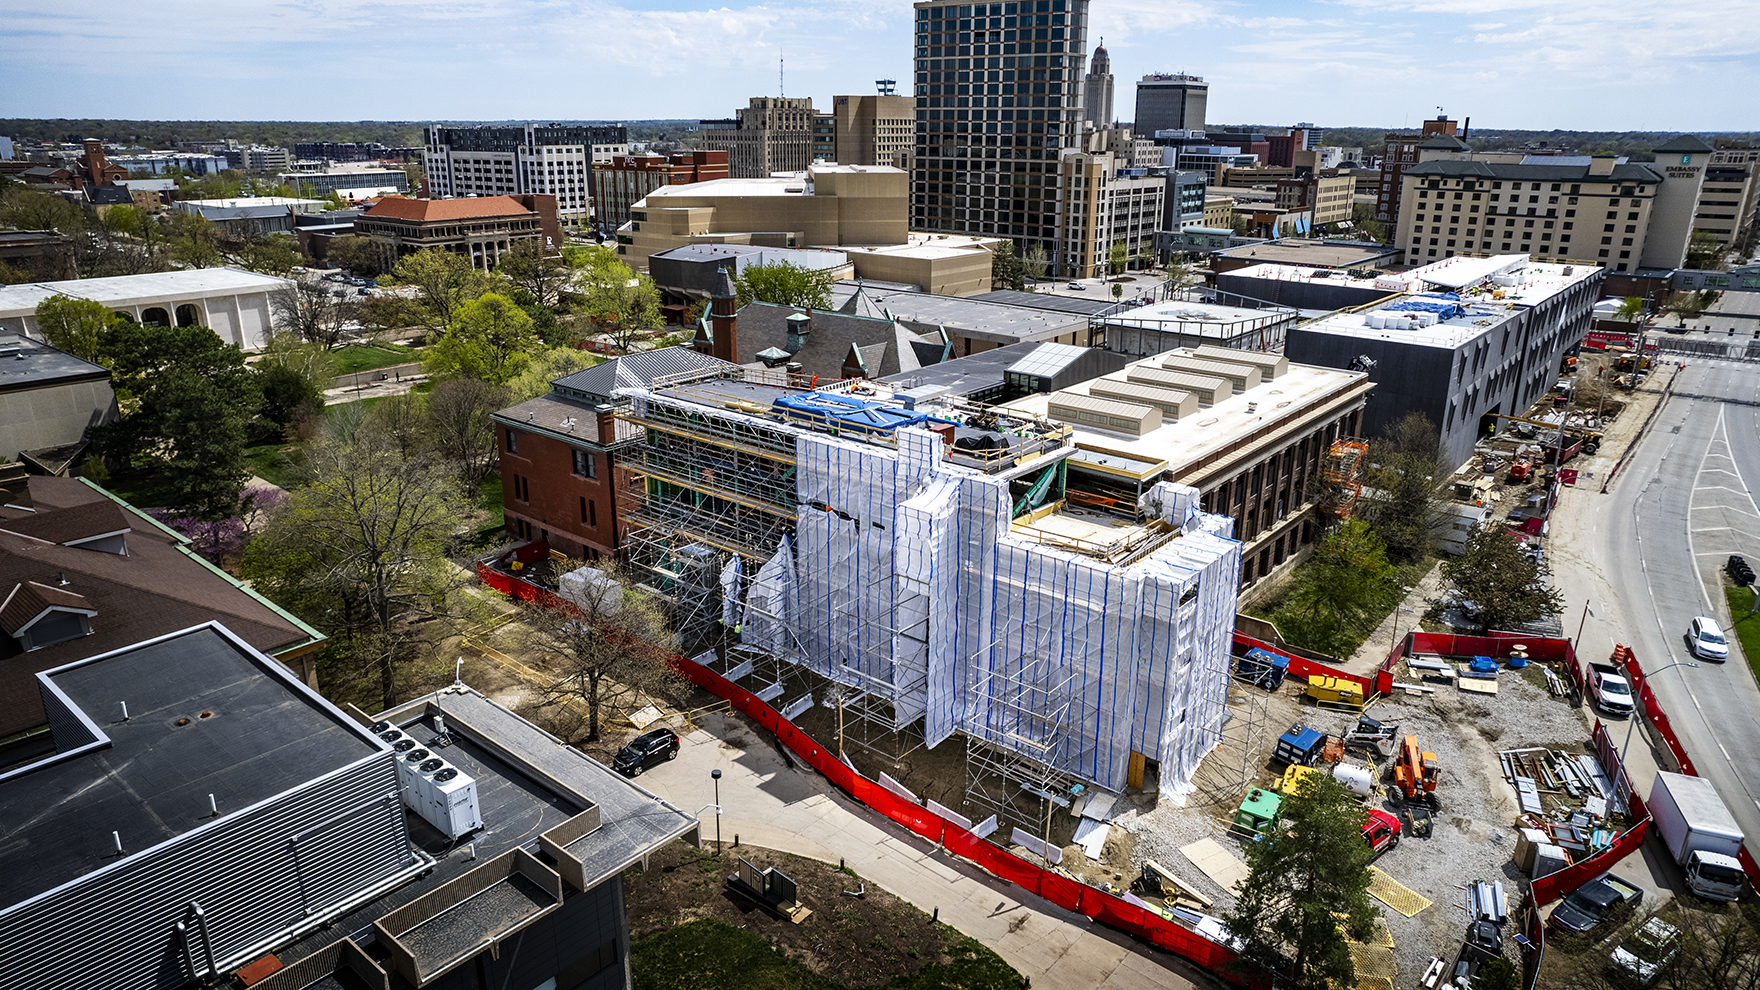 The north addition to Architecture Hall (shown here, wrapped in scaffolding and protective plastic) at the University of Nebraska–Lincoln will be named HDR Pavilion in honor of the College of Architecture's longstanding collaboration with HDR.